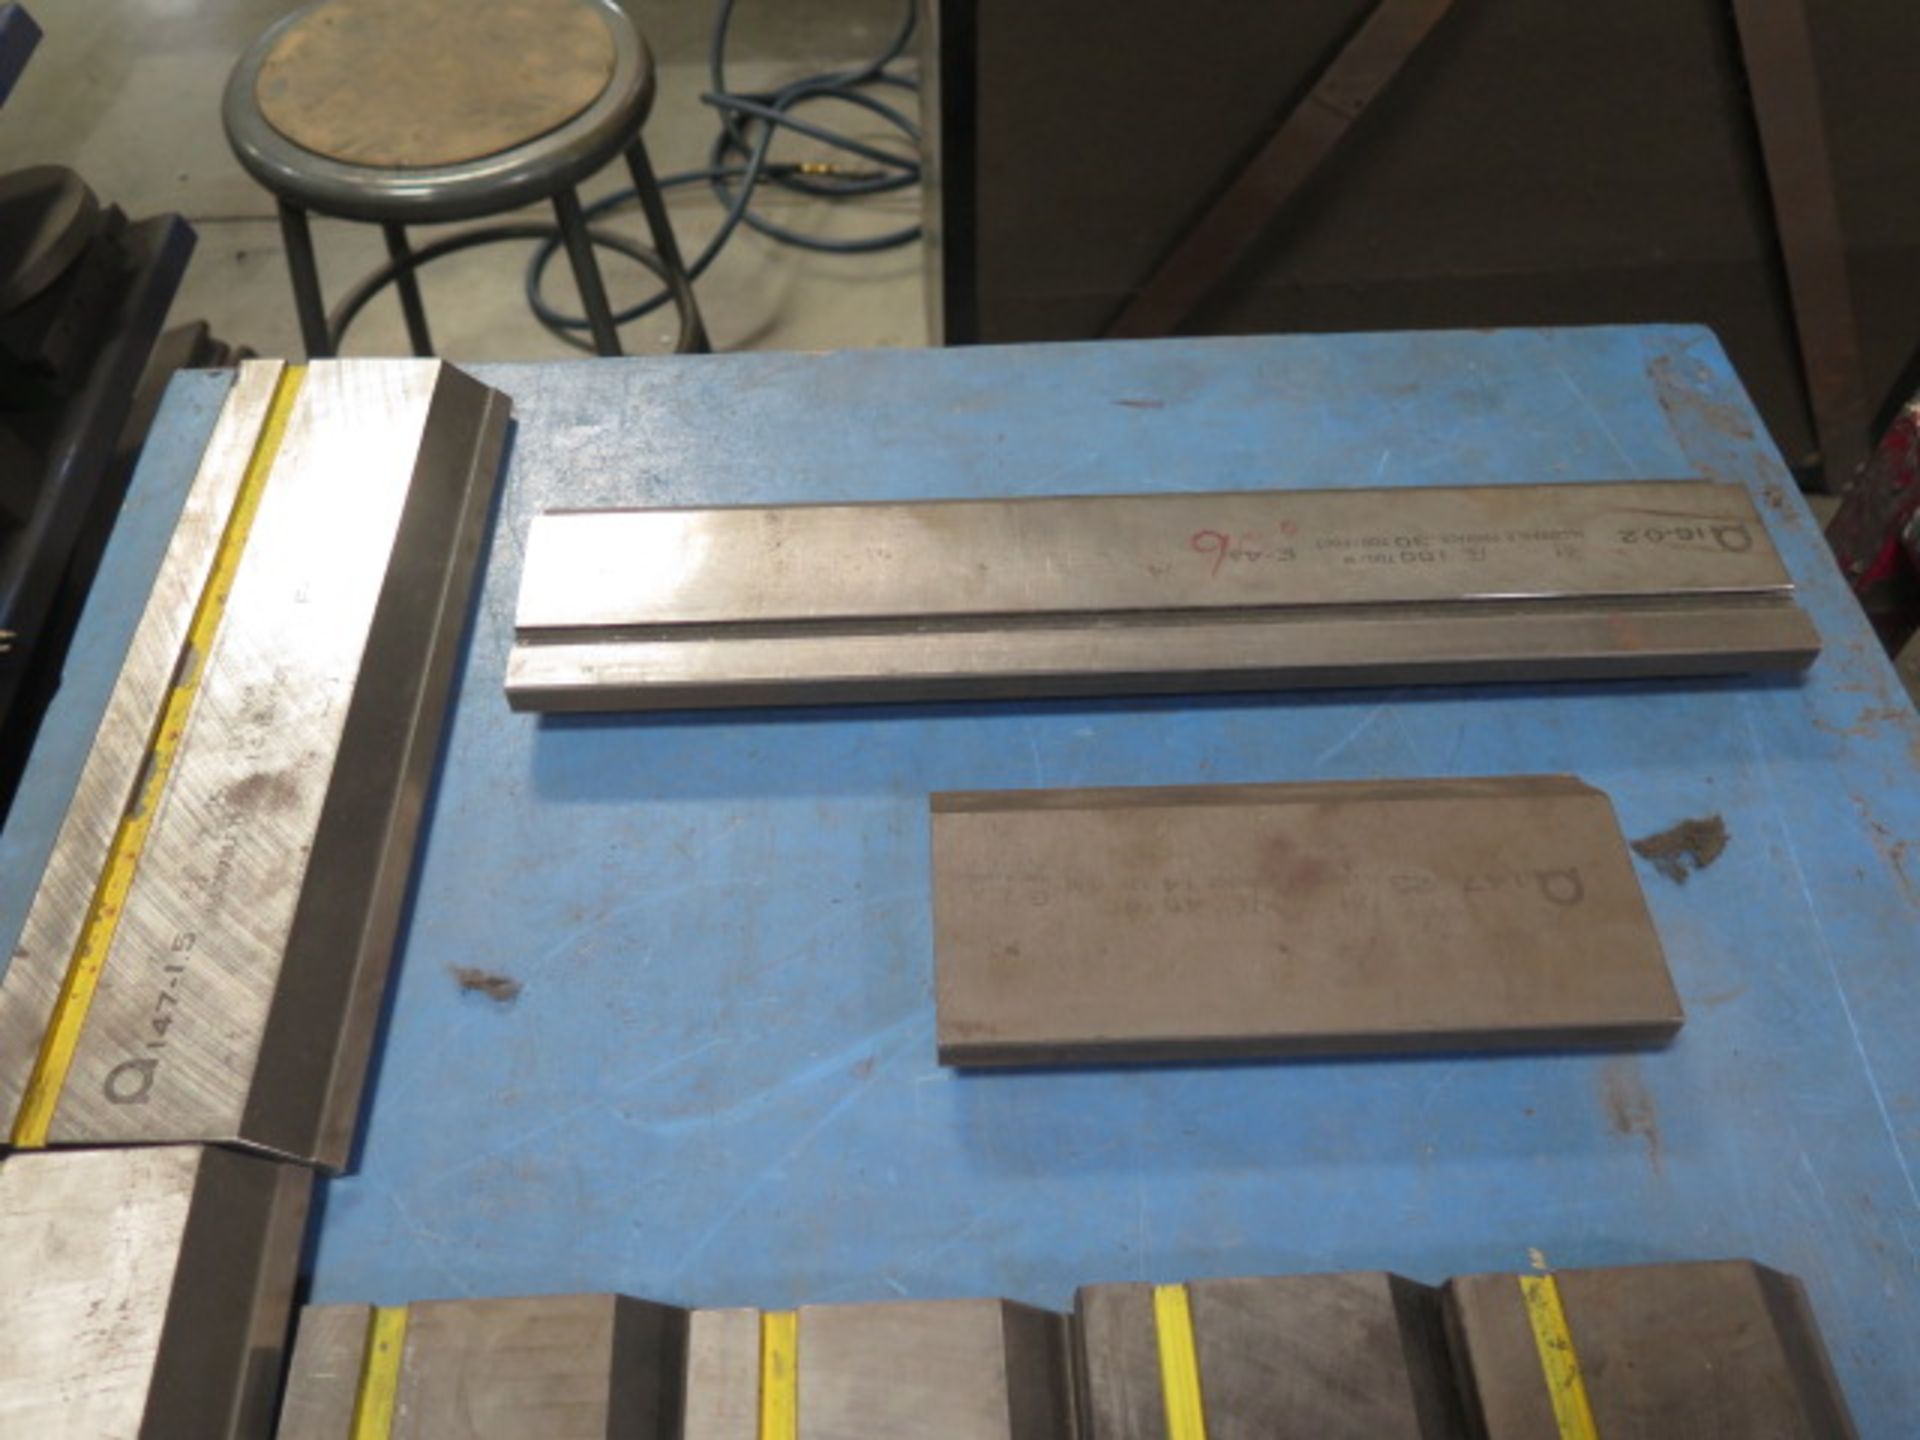 Amada Press Brake Tooling w/ Cart (SOLD AS-IS - NO WARRANTY) - Image 5 of 12